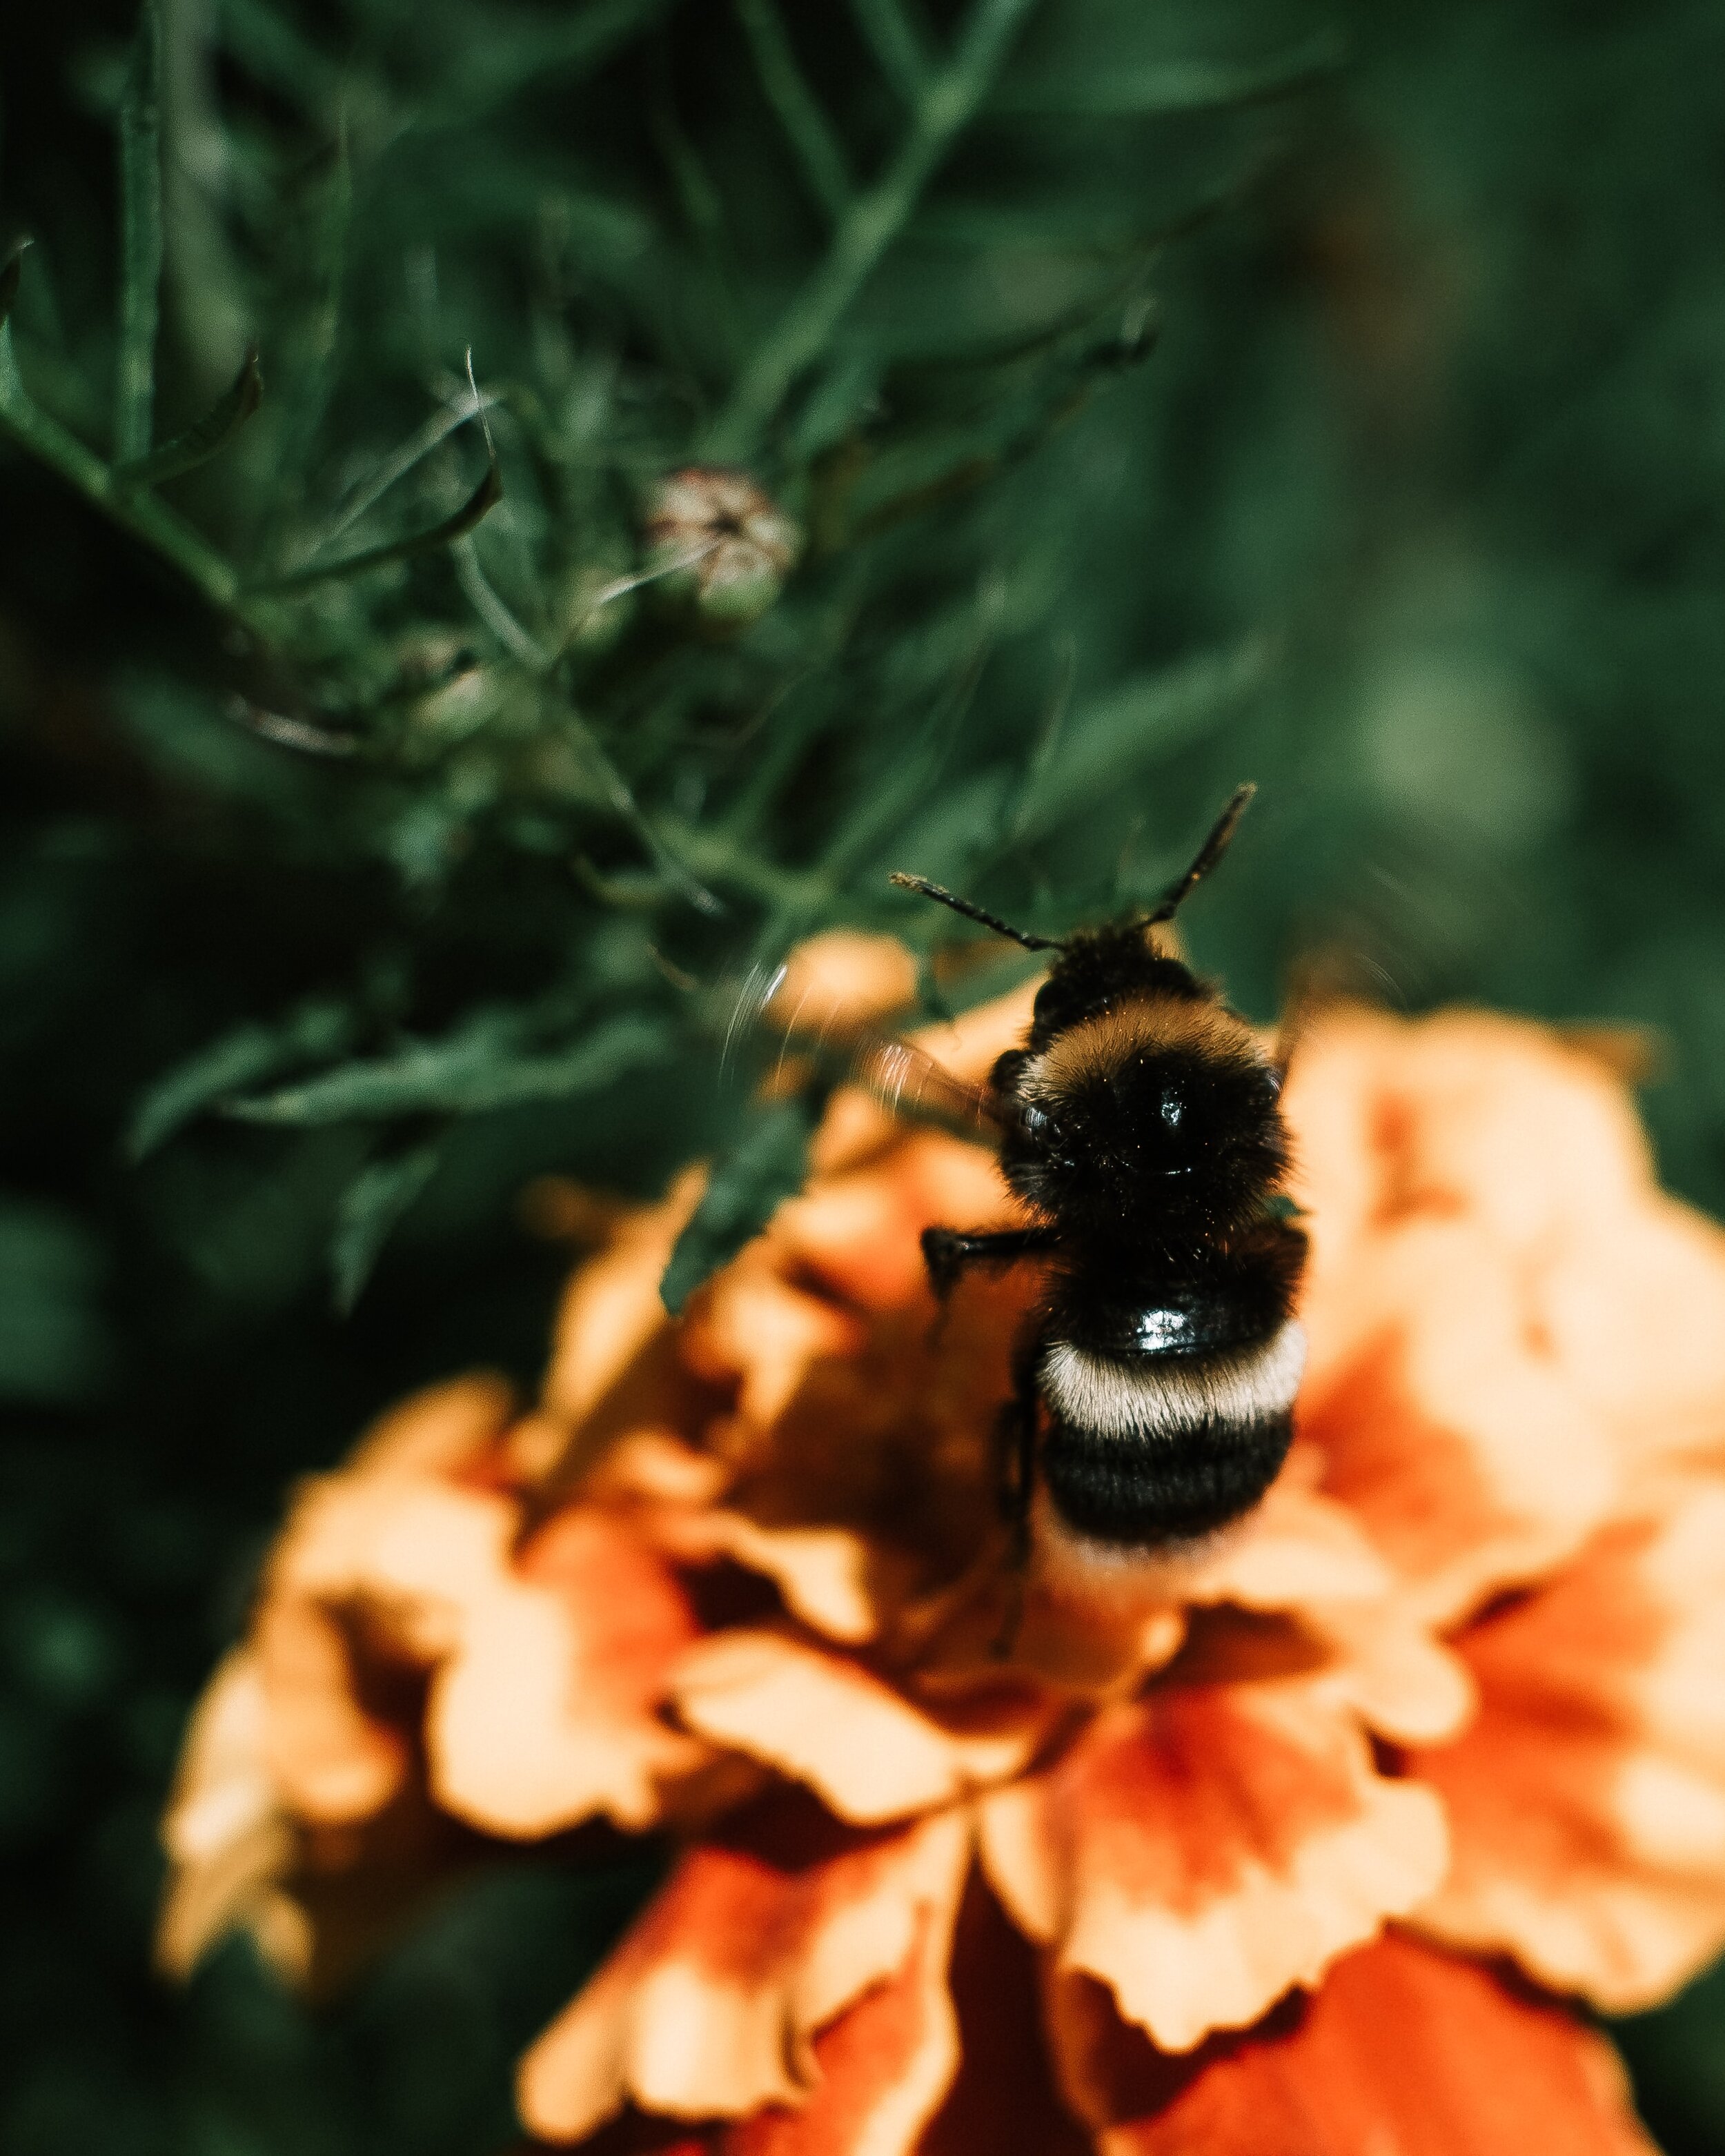  Bumblebees have quite a few natural enemies including wasps called “bee wolves” and spiders disguised as flowers that eat them when they attempt to sip nectar from them. 